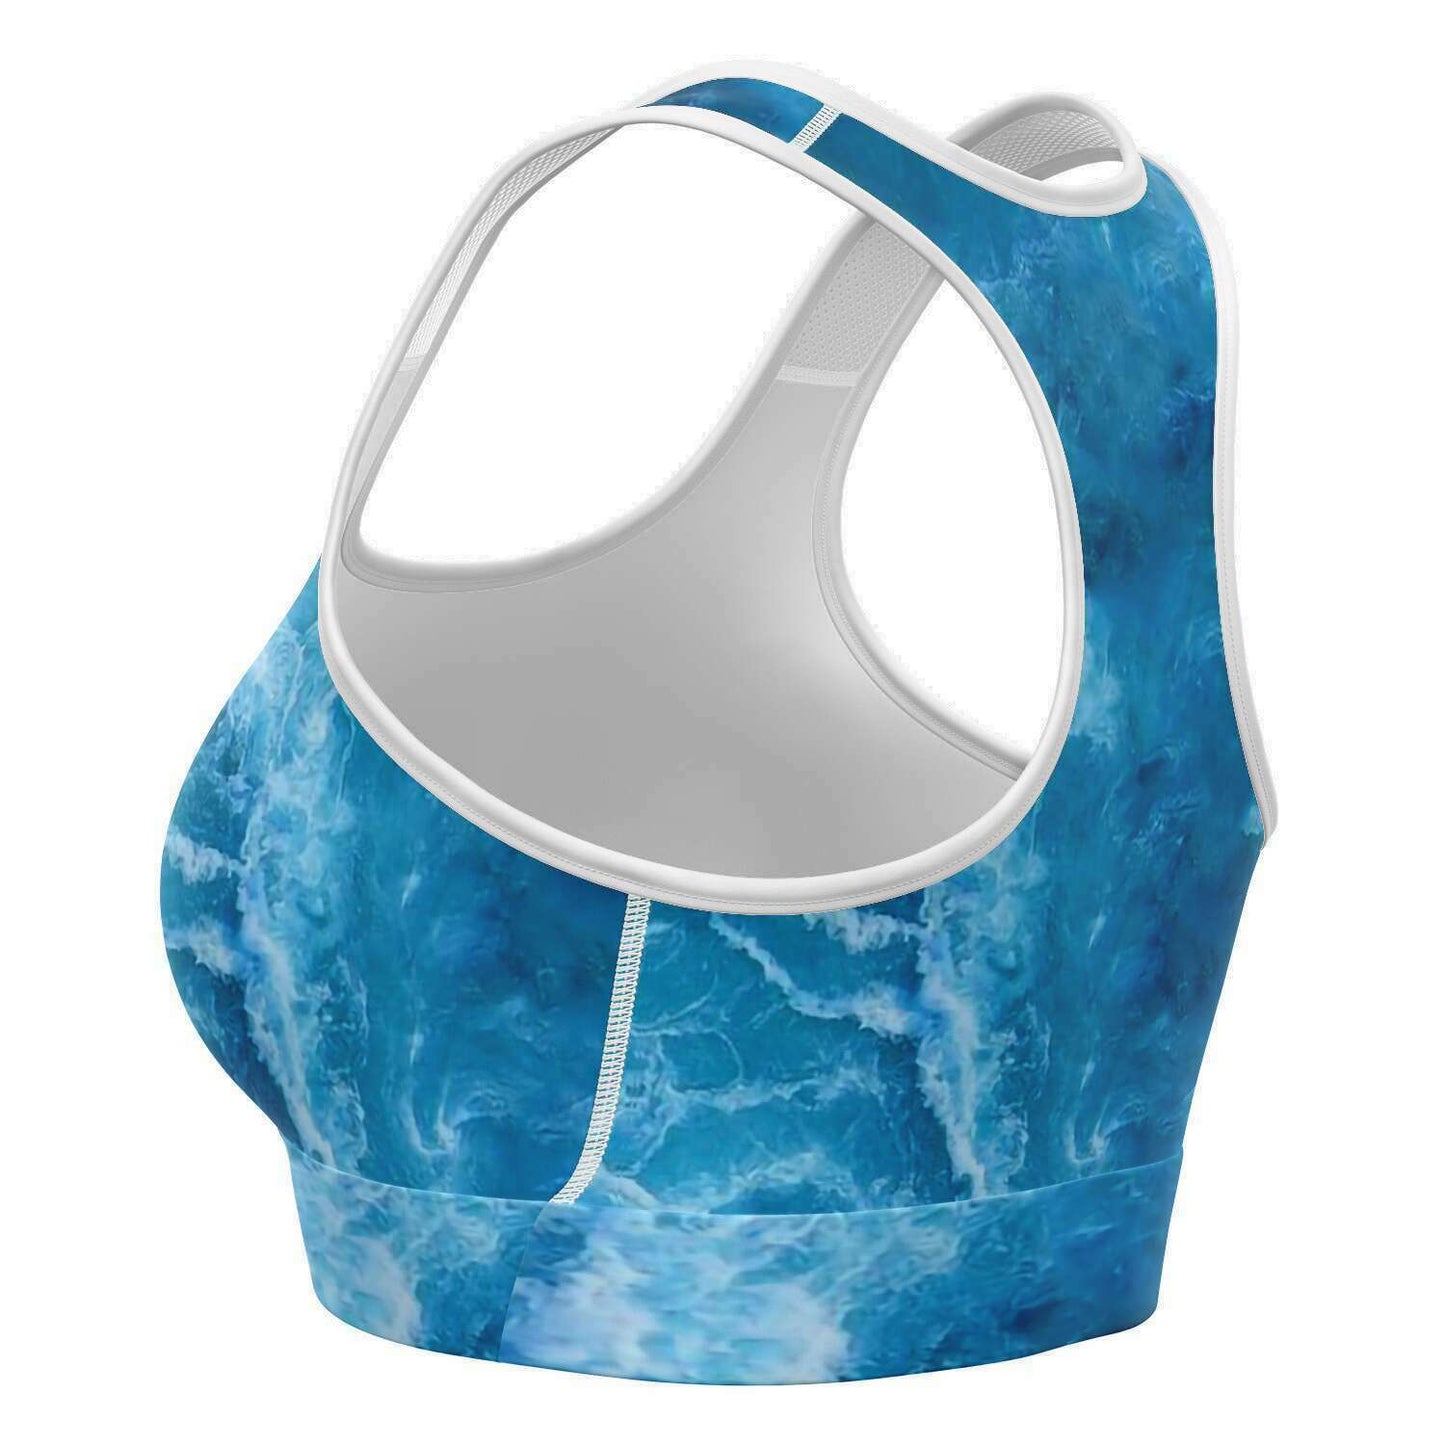 Ocean patterned sports bra crop top side view showing moisture wicking and support for scuba divers yoga and other sports